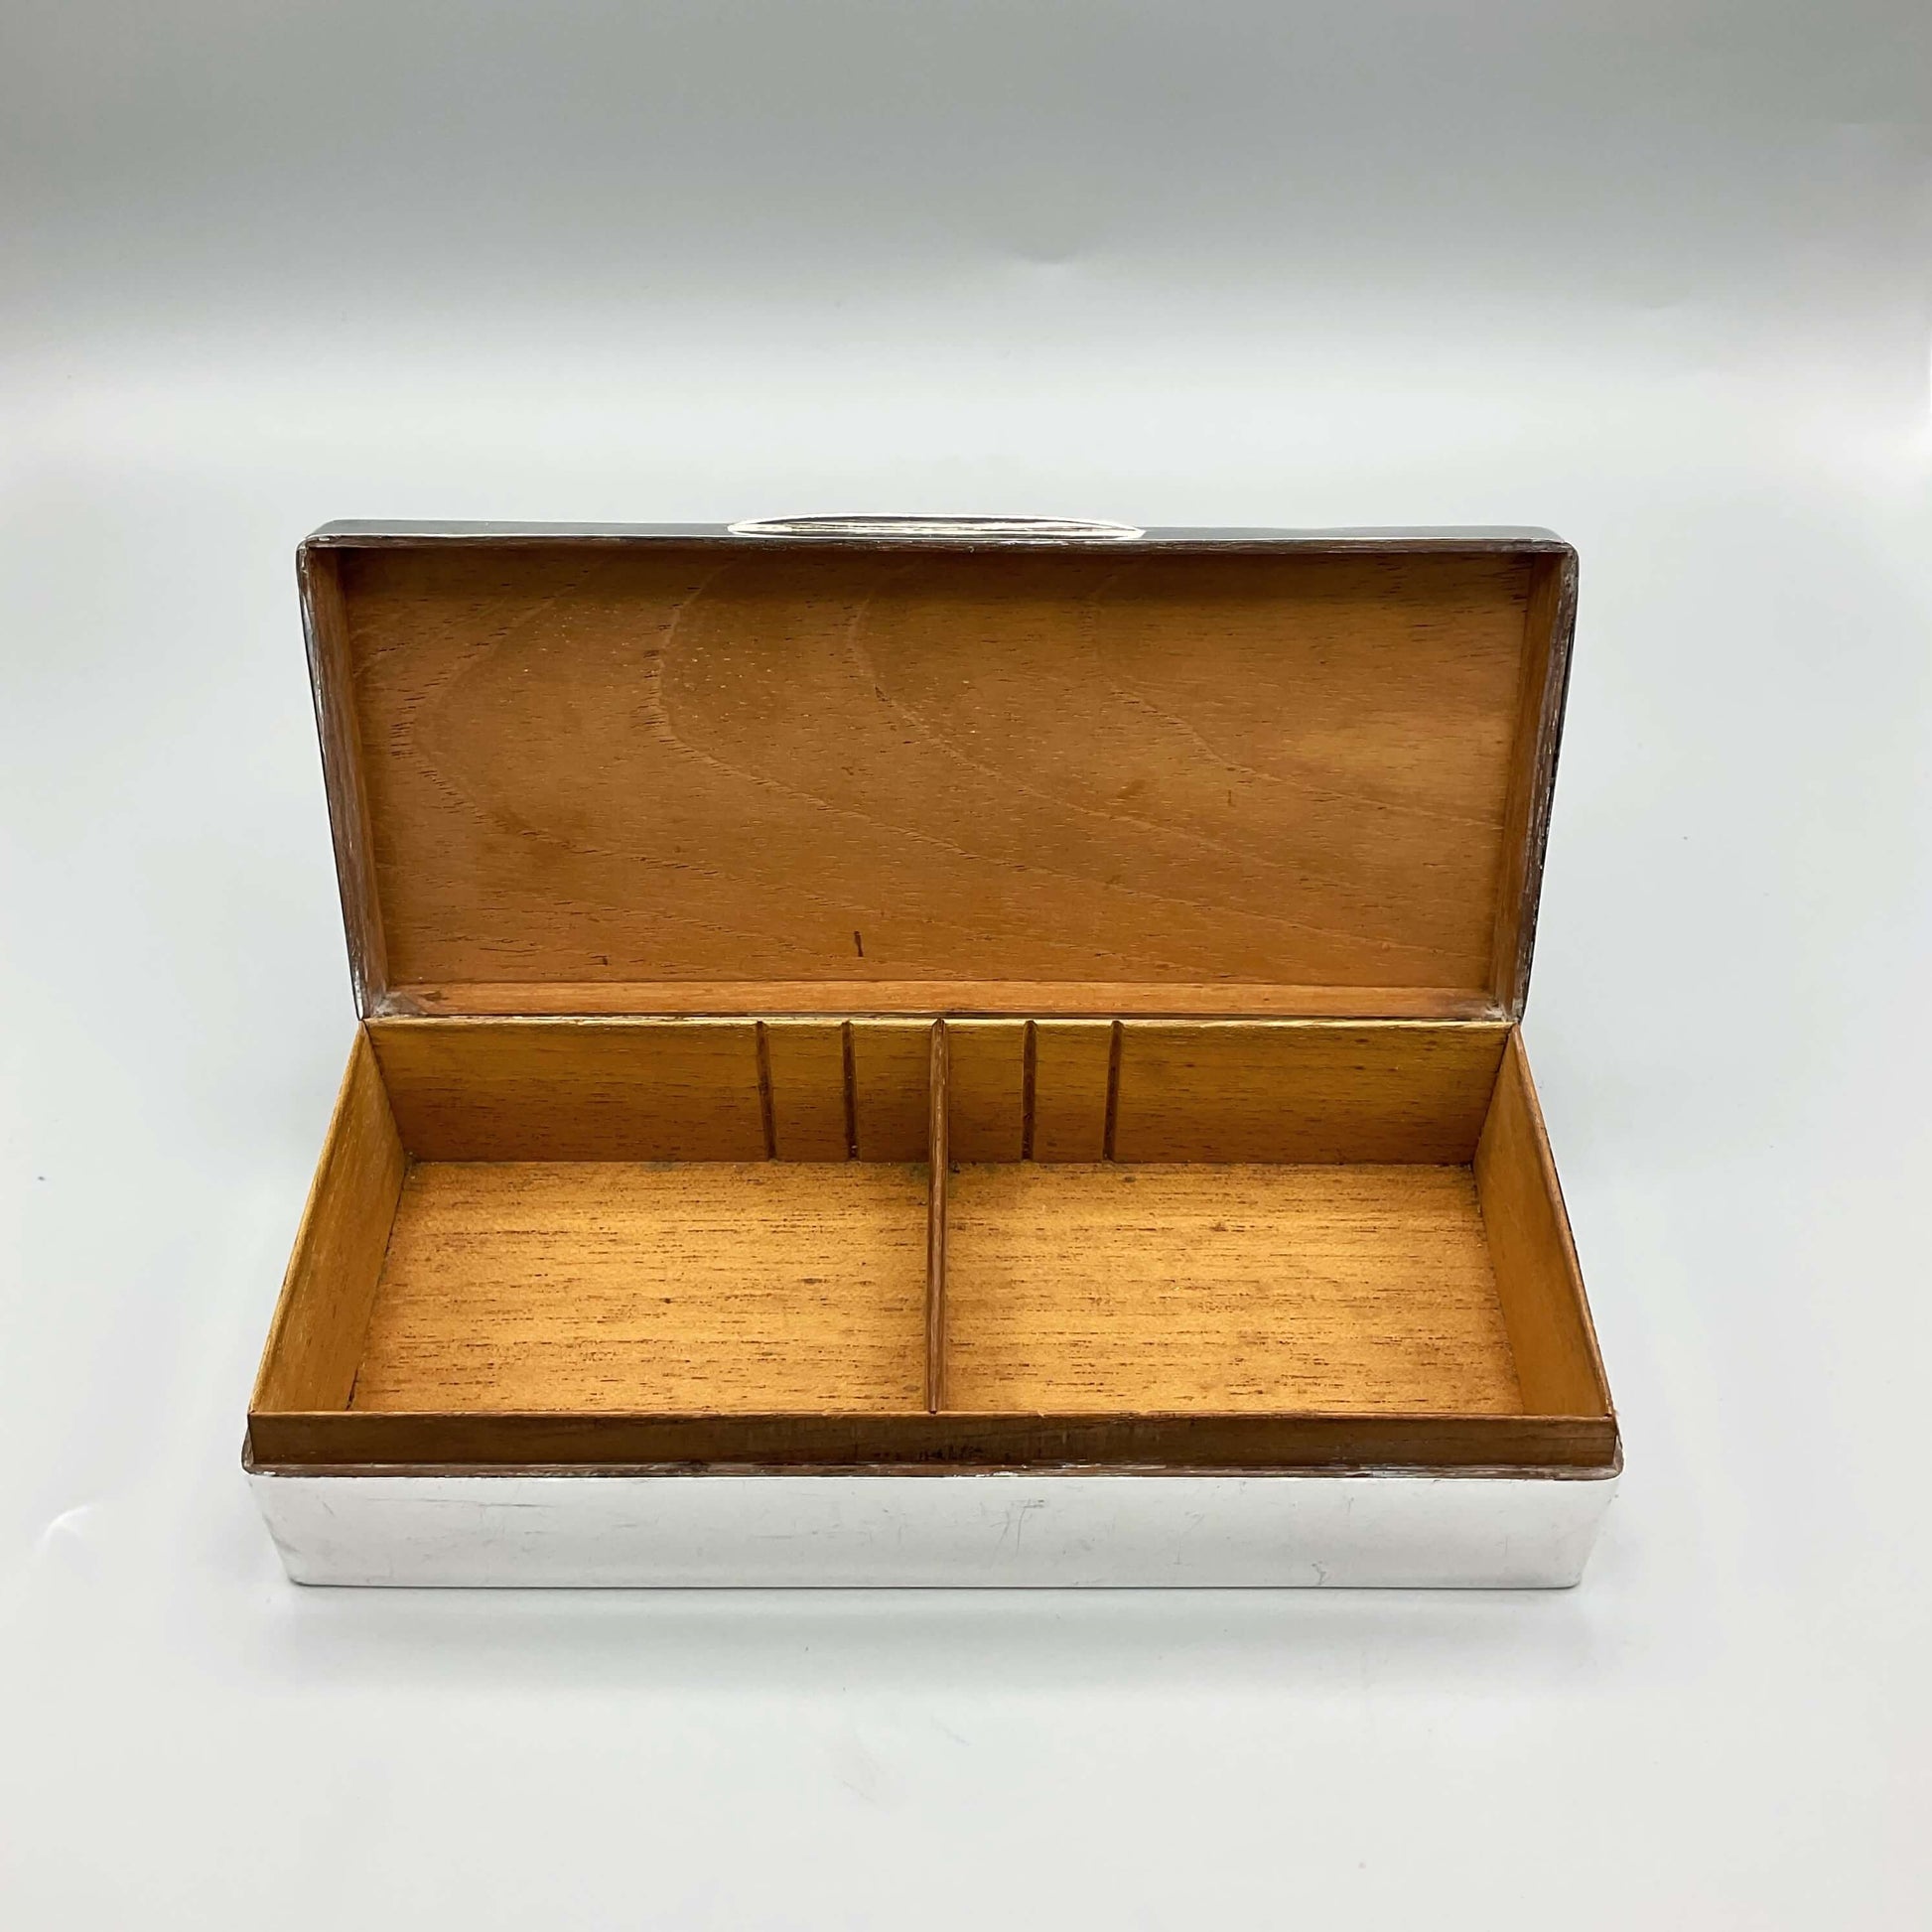 large antique cigar or cigarette box with lid open showing a fully lined wood interior